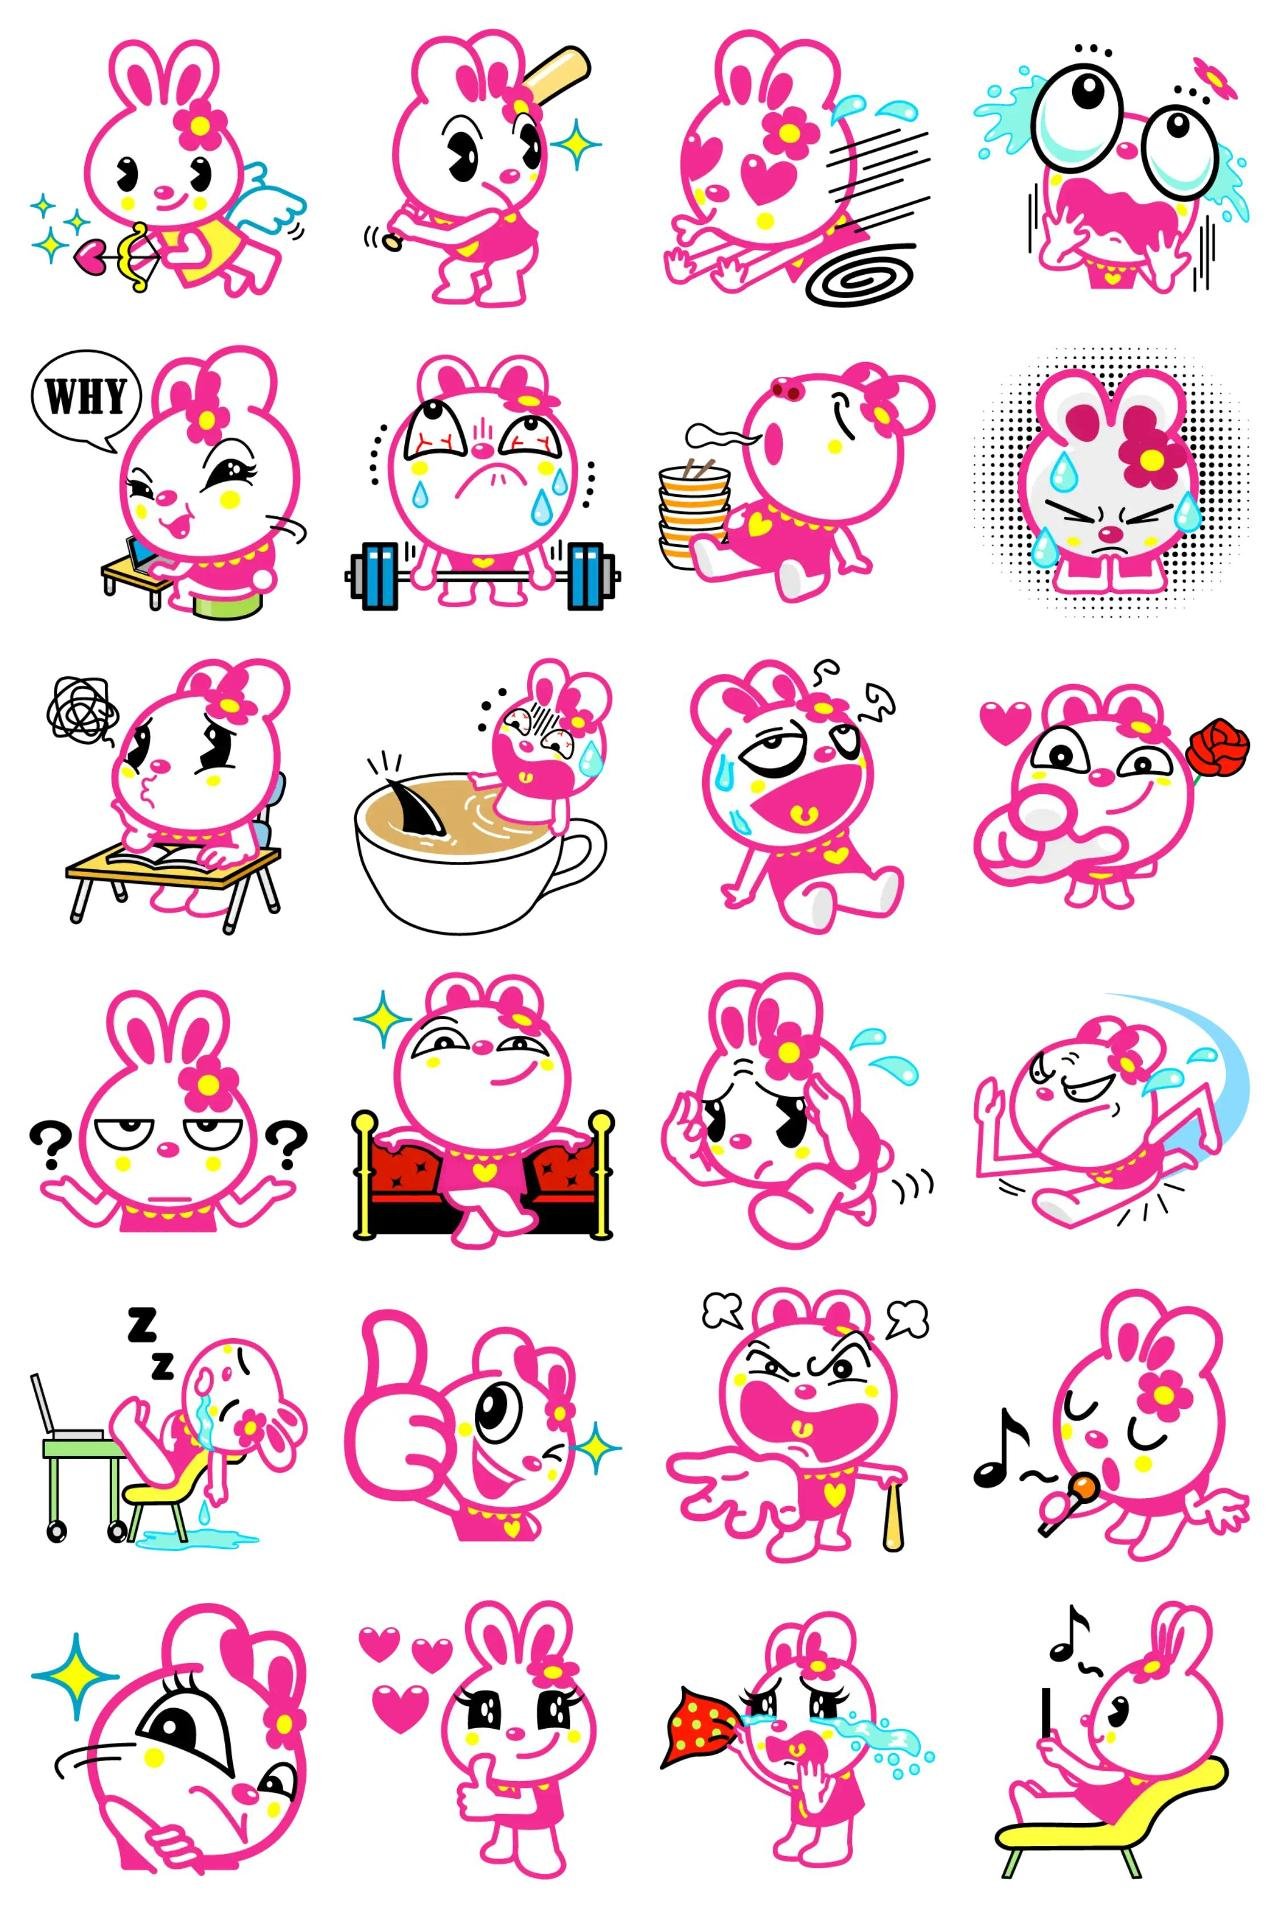 Positive Rabbit Hipani 5 Animals sticker pack for Whatsapp, Telegram, Signal, and others chatting and message apps